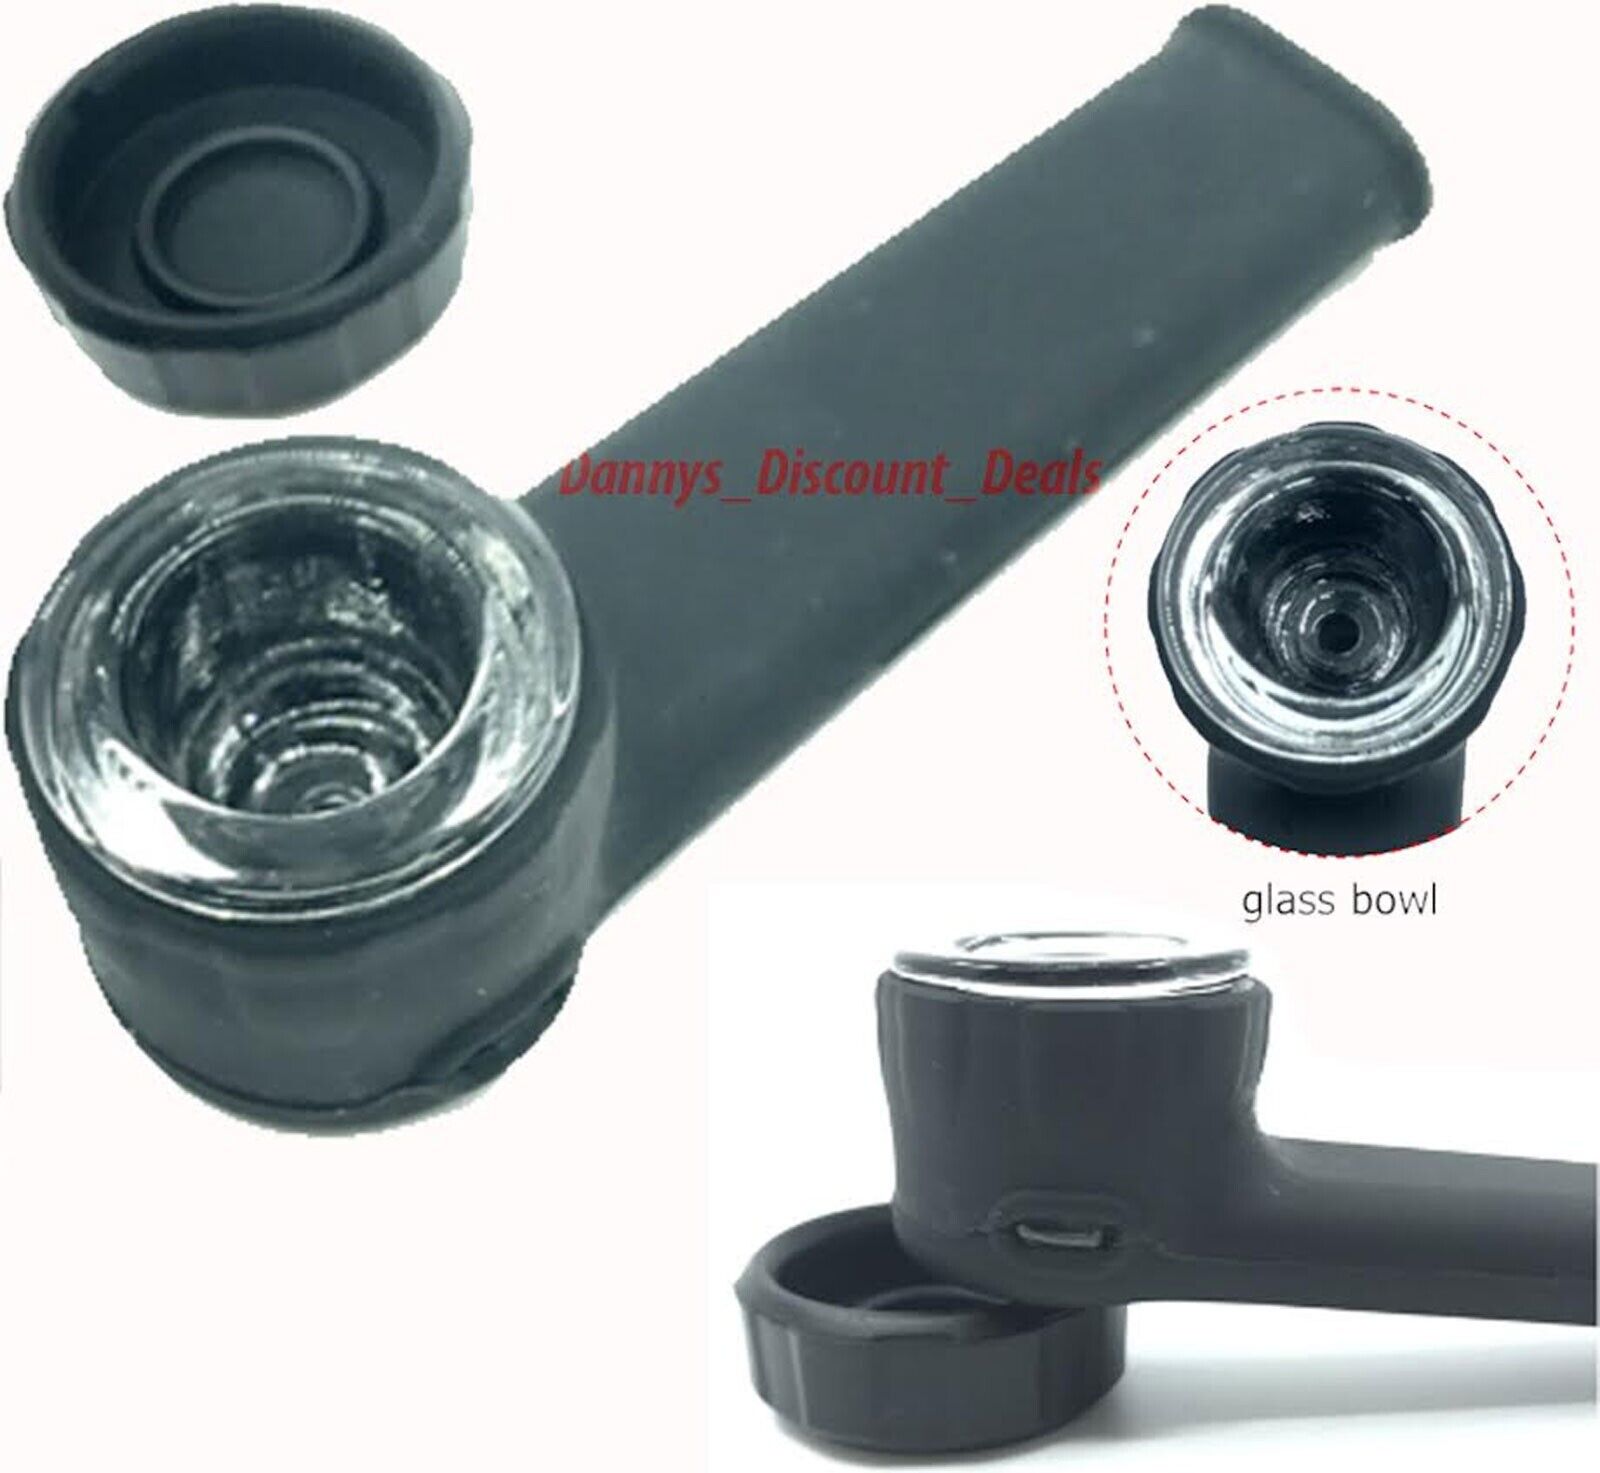 Silicone PIPE Flexible Handheld Tobacco Smoking with Cap Lid Black